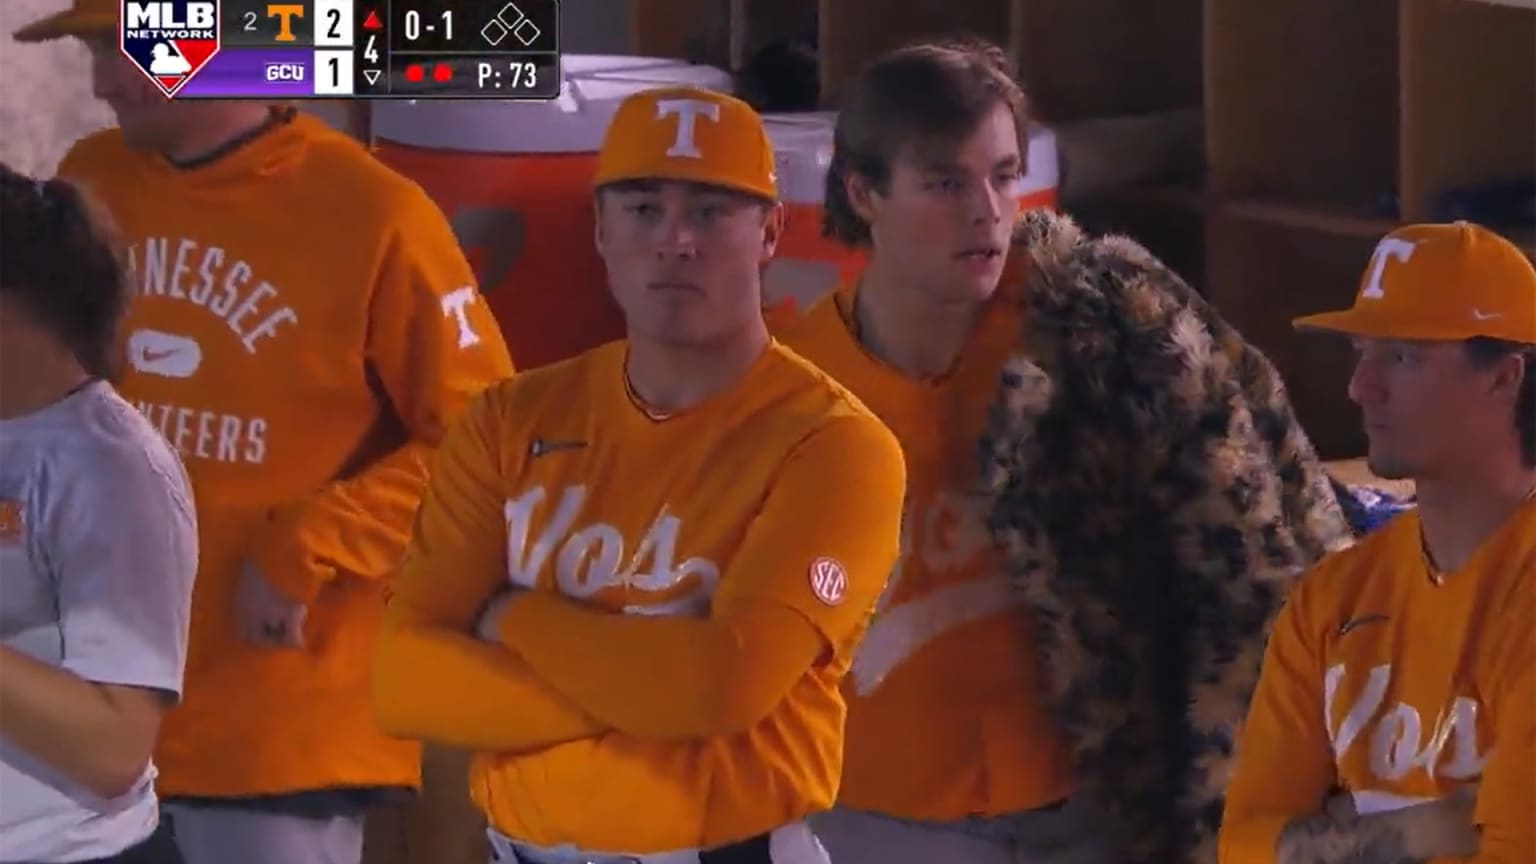 Cal Stark slings a fur coat over his shoulder in the dugout